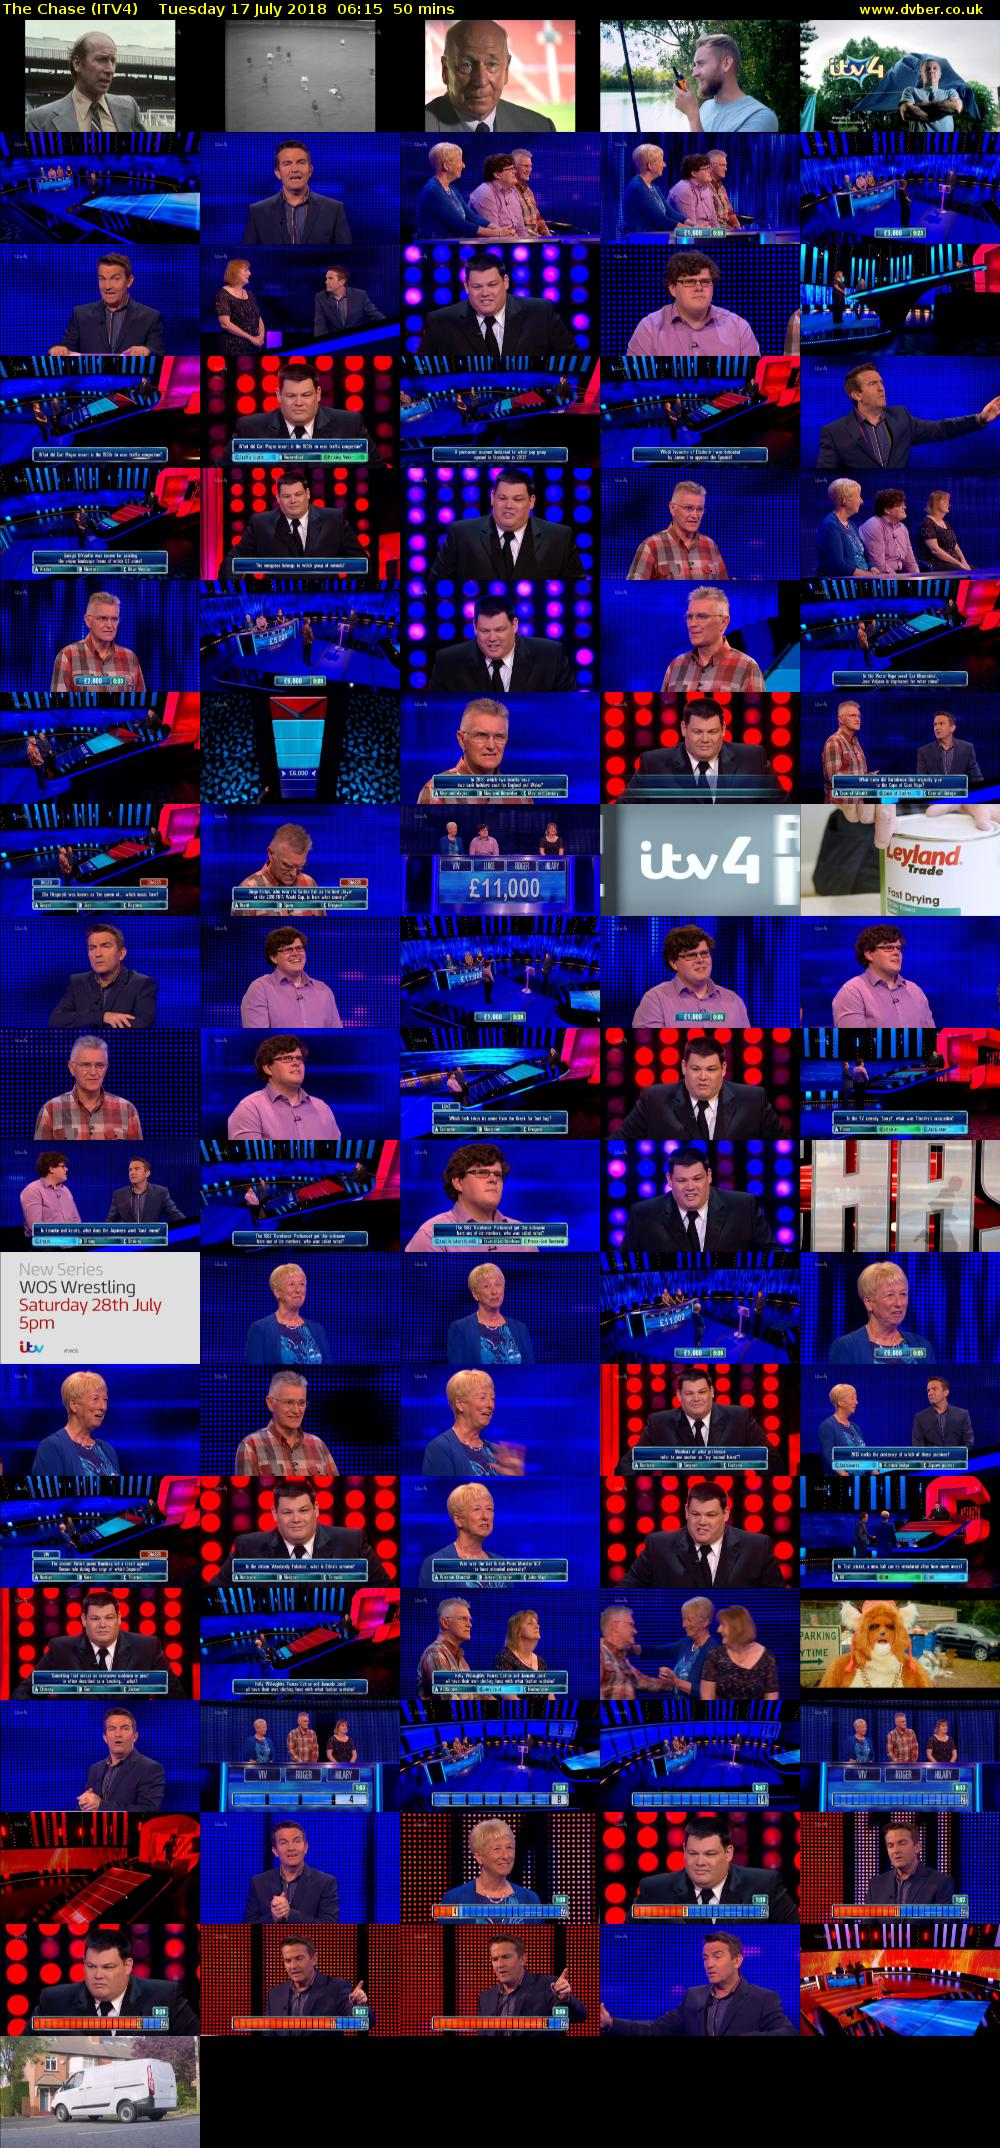 The Chase (ITV4) Tuesday 17 July 2018 06:15 - 07:05